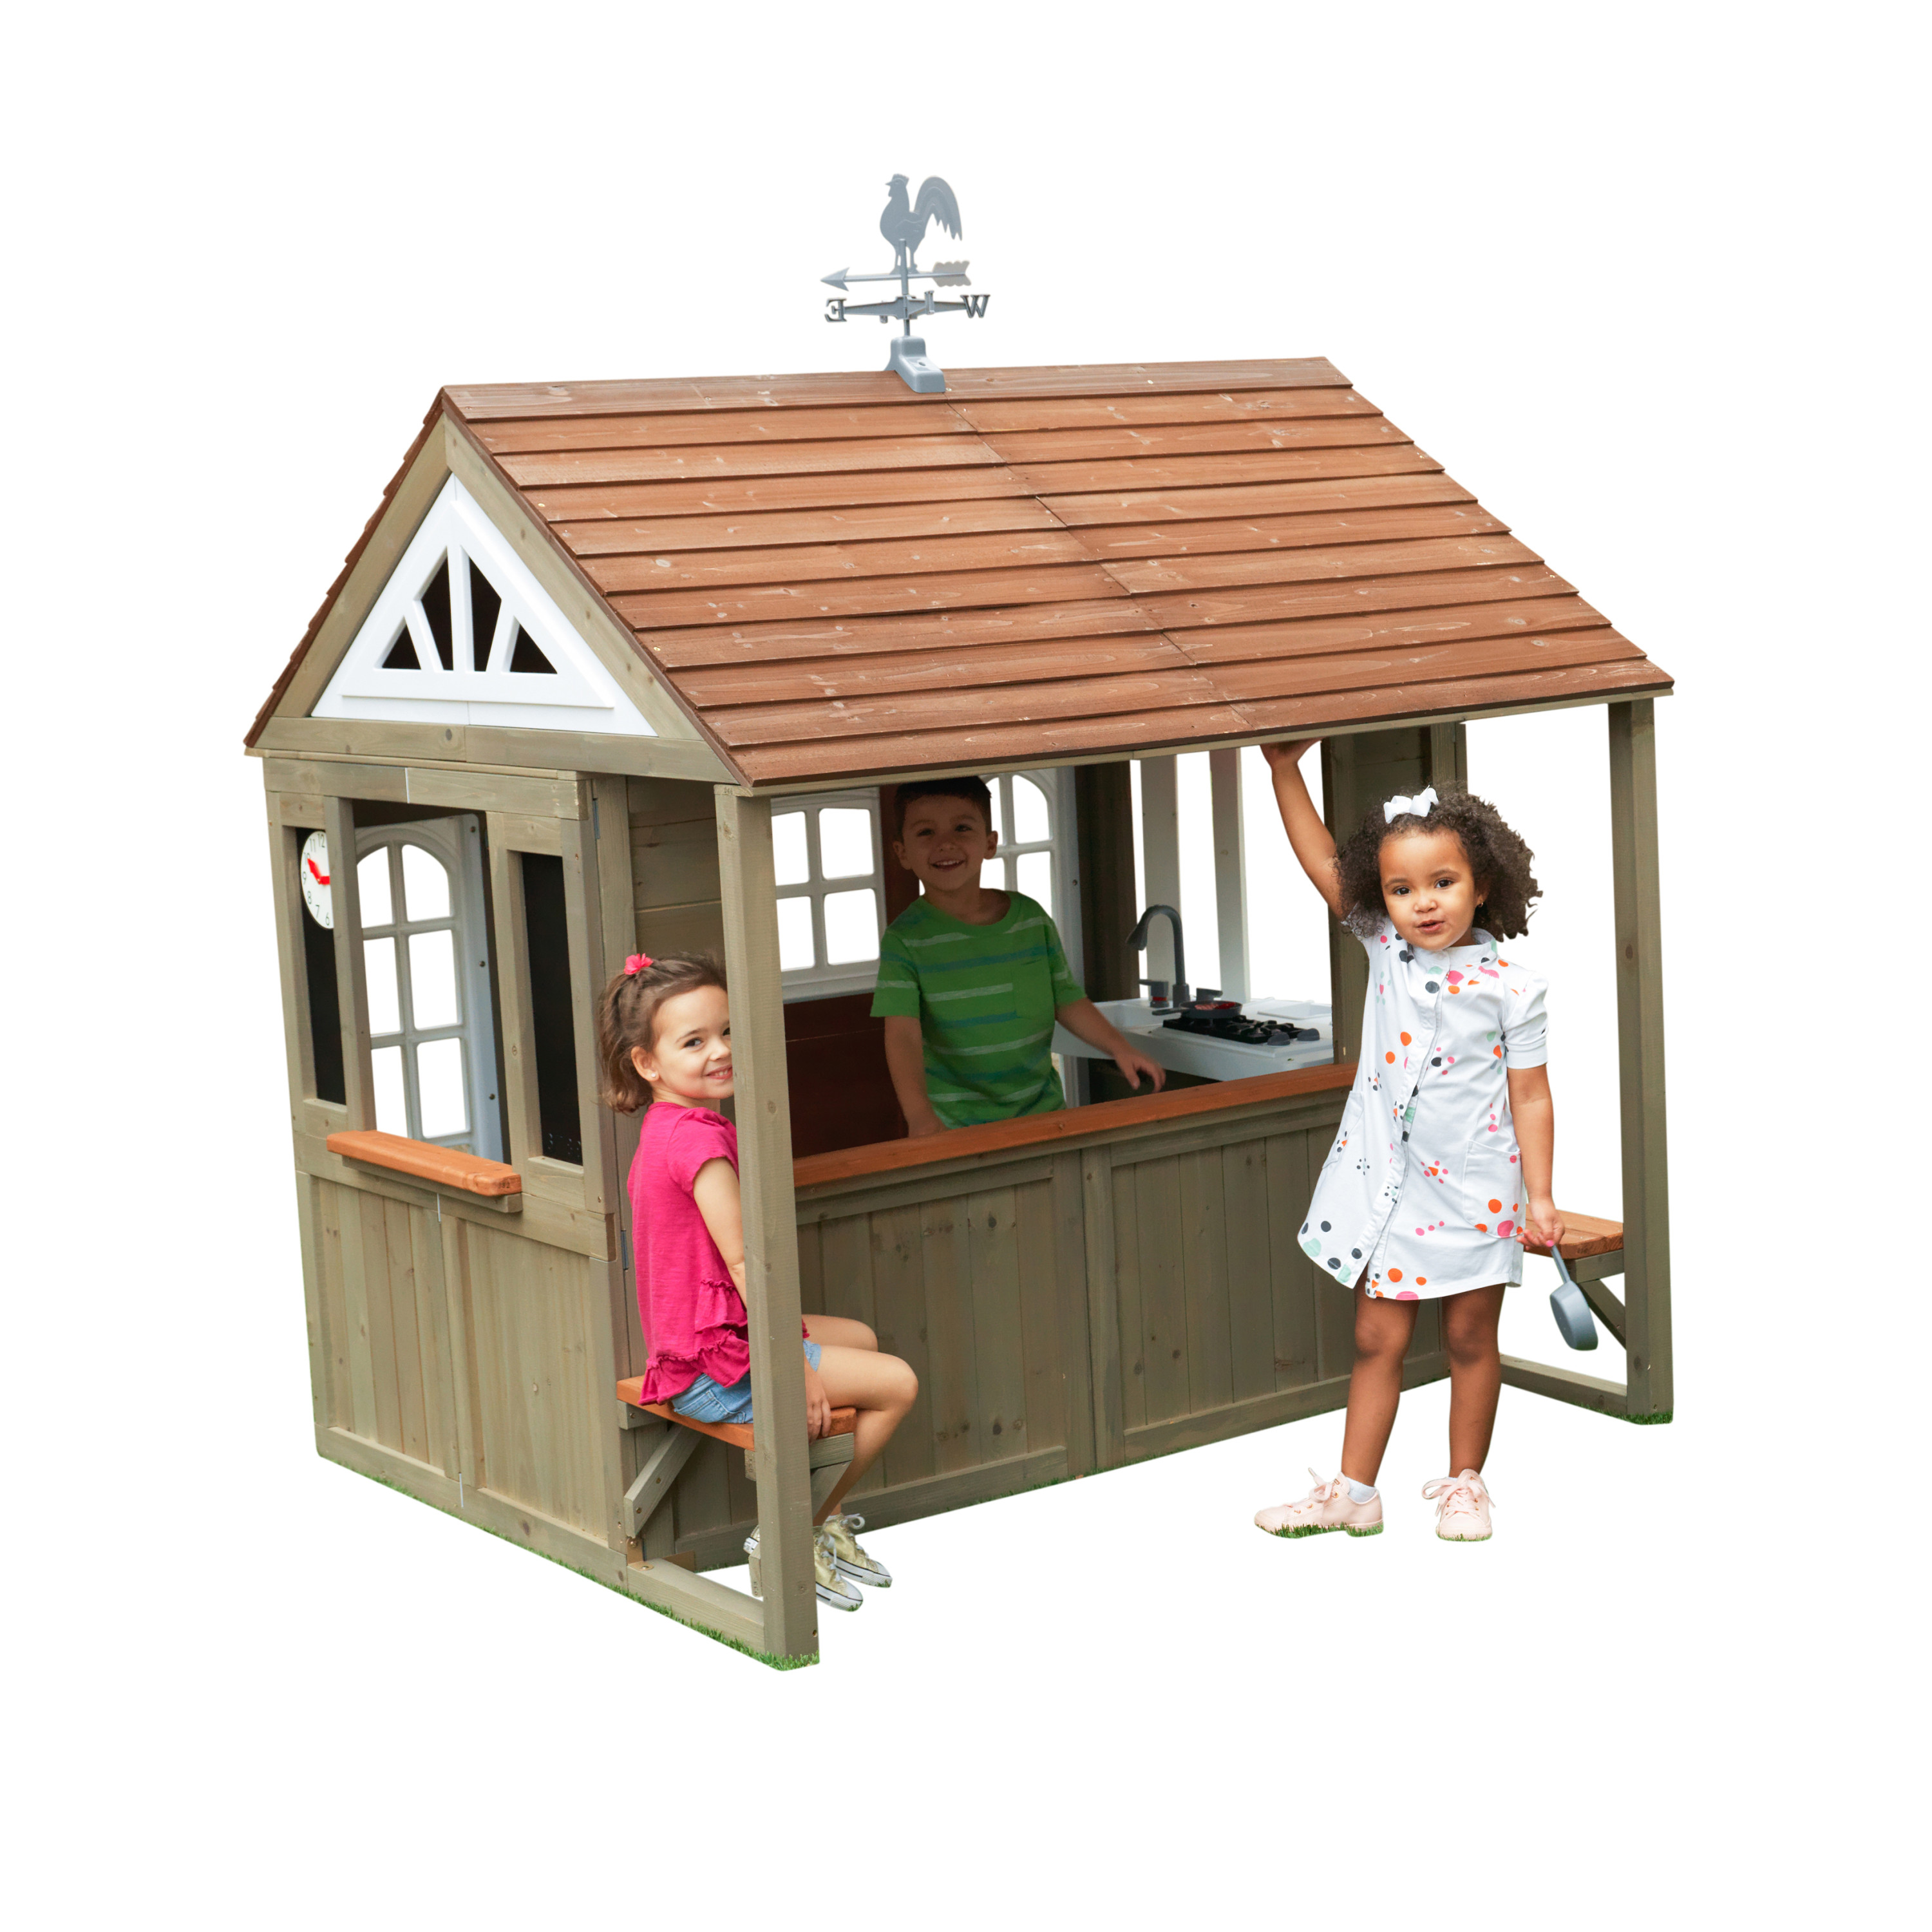 KidKraft Country Vista Wooden Outdoor Playhouse with Double Doors, Play Kitchen & Benches $139.60